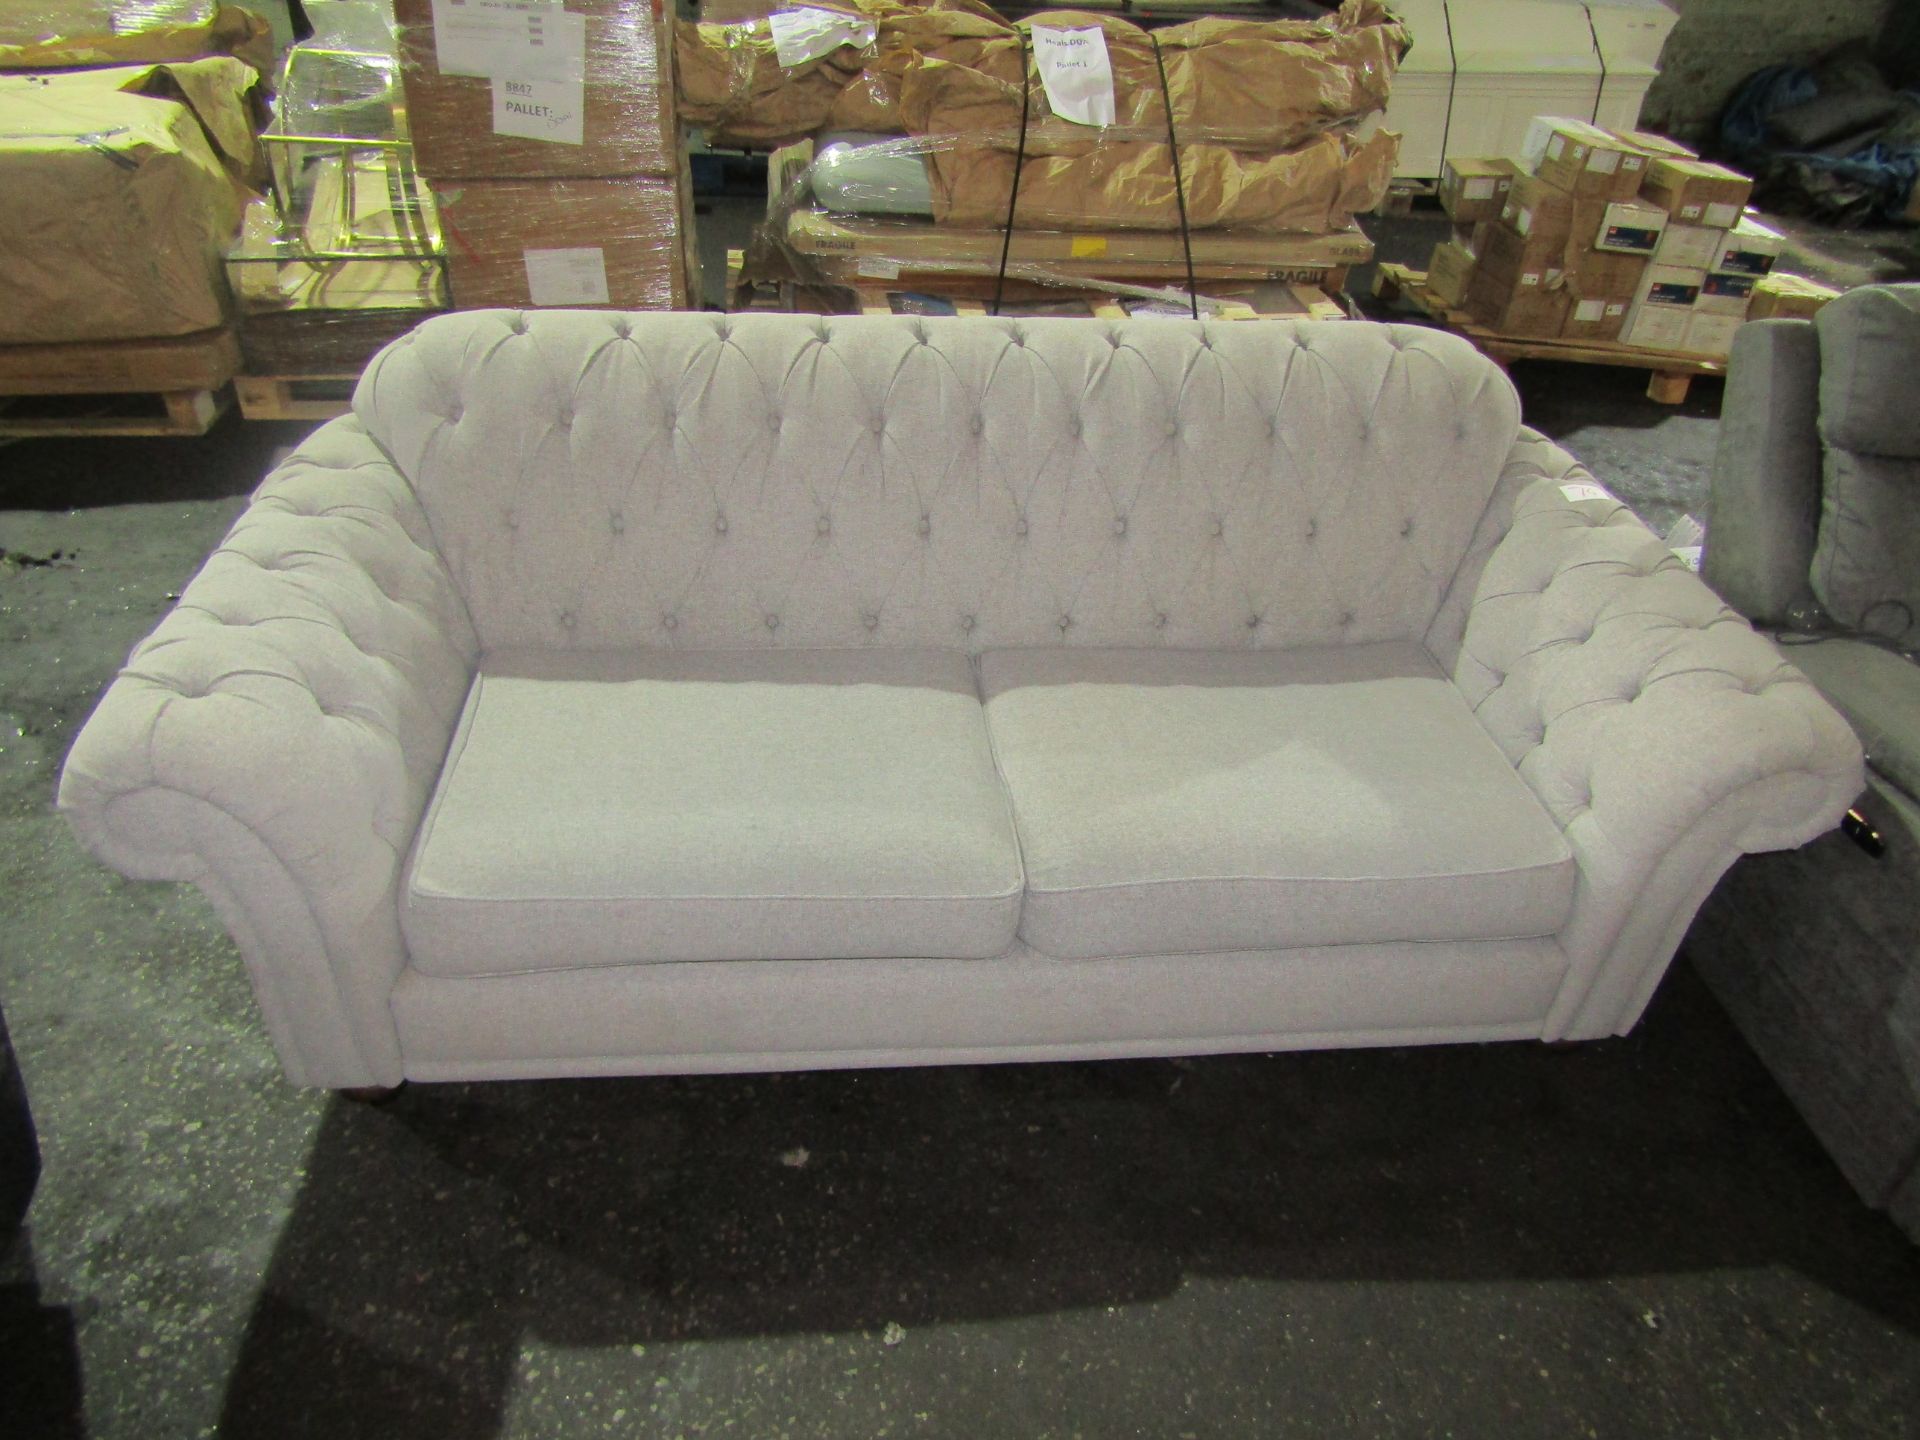 Bordeaux button back 2 seater sofa, Light grey fabric - Overall good condition with feet - RRP £